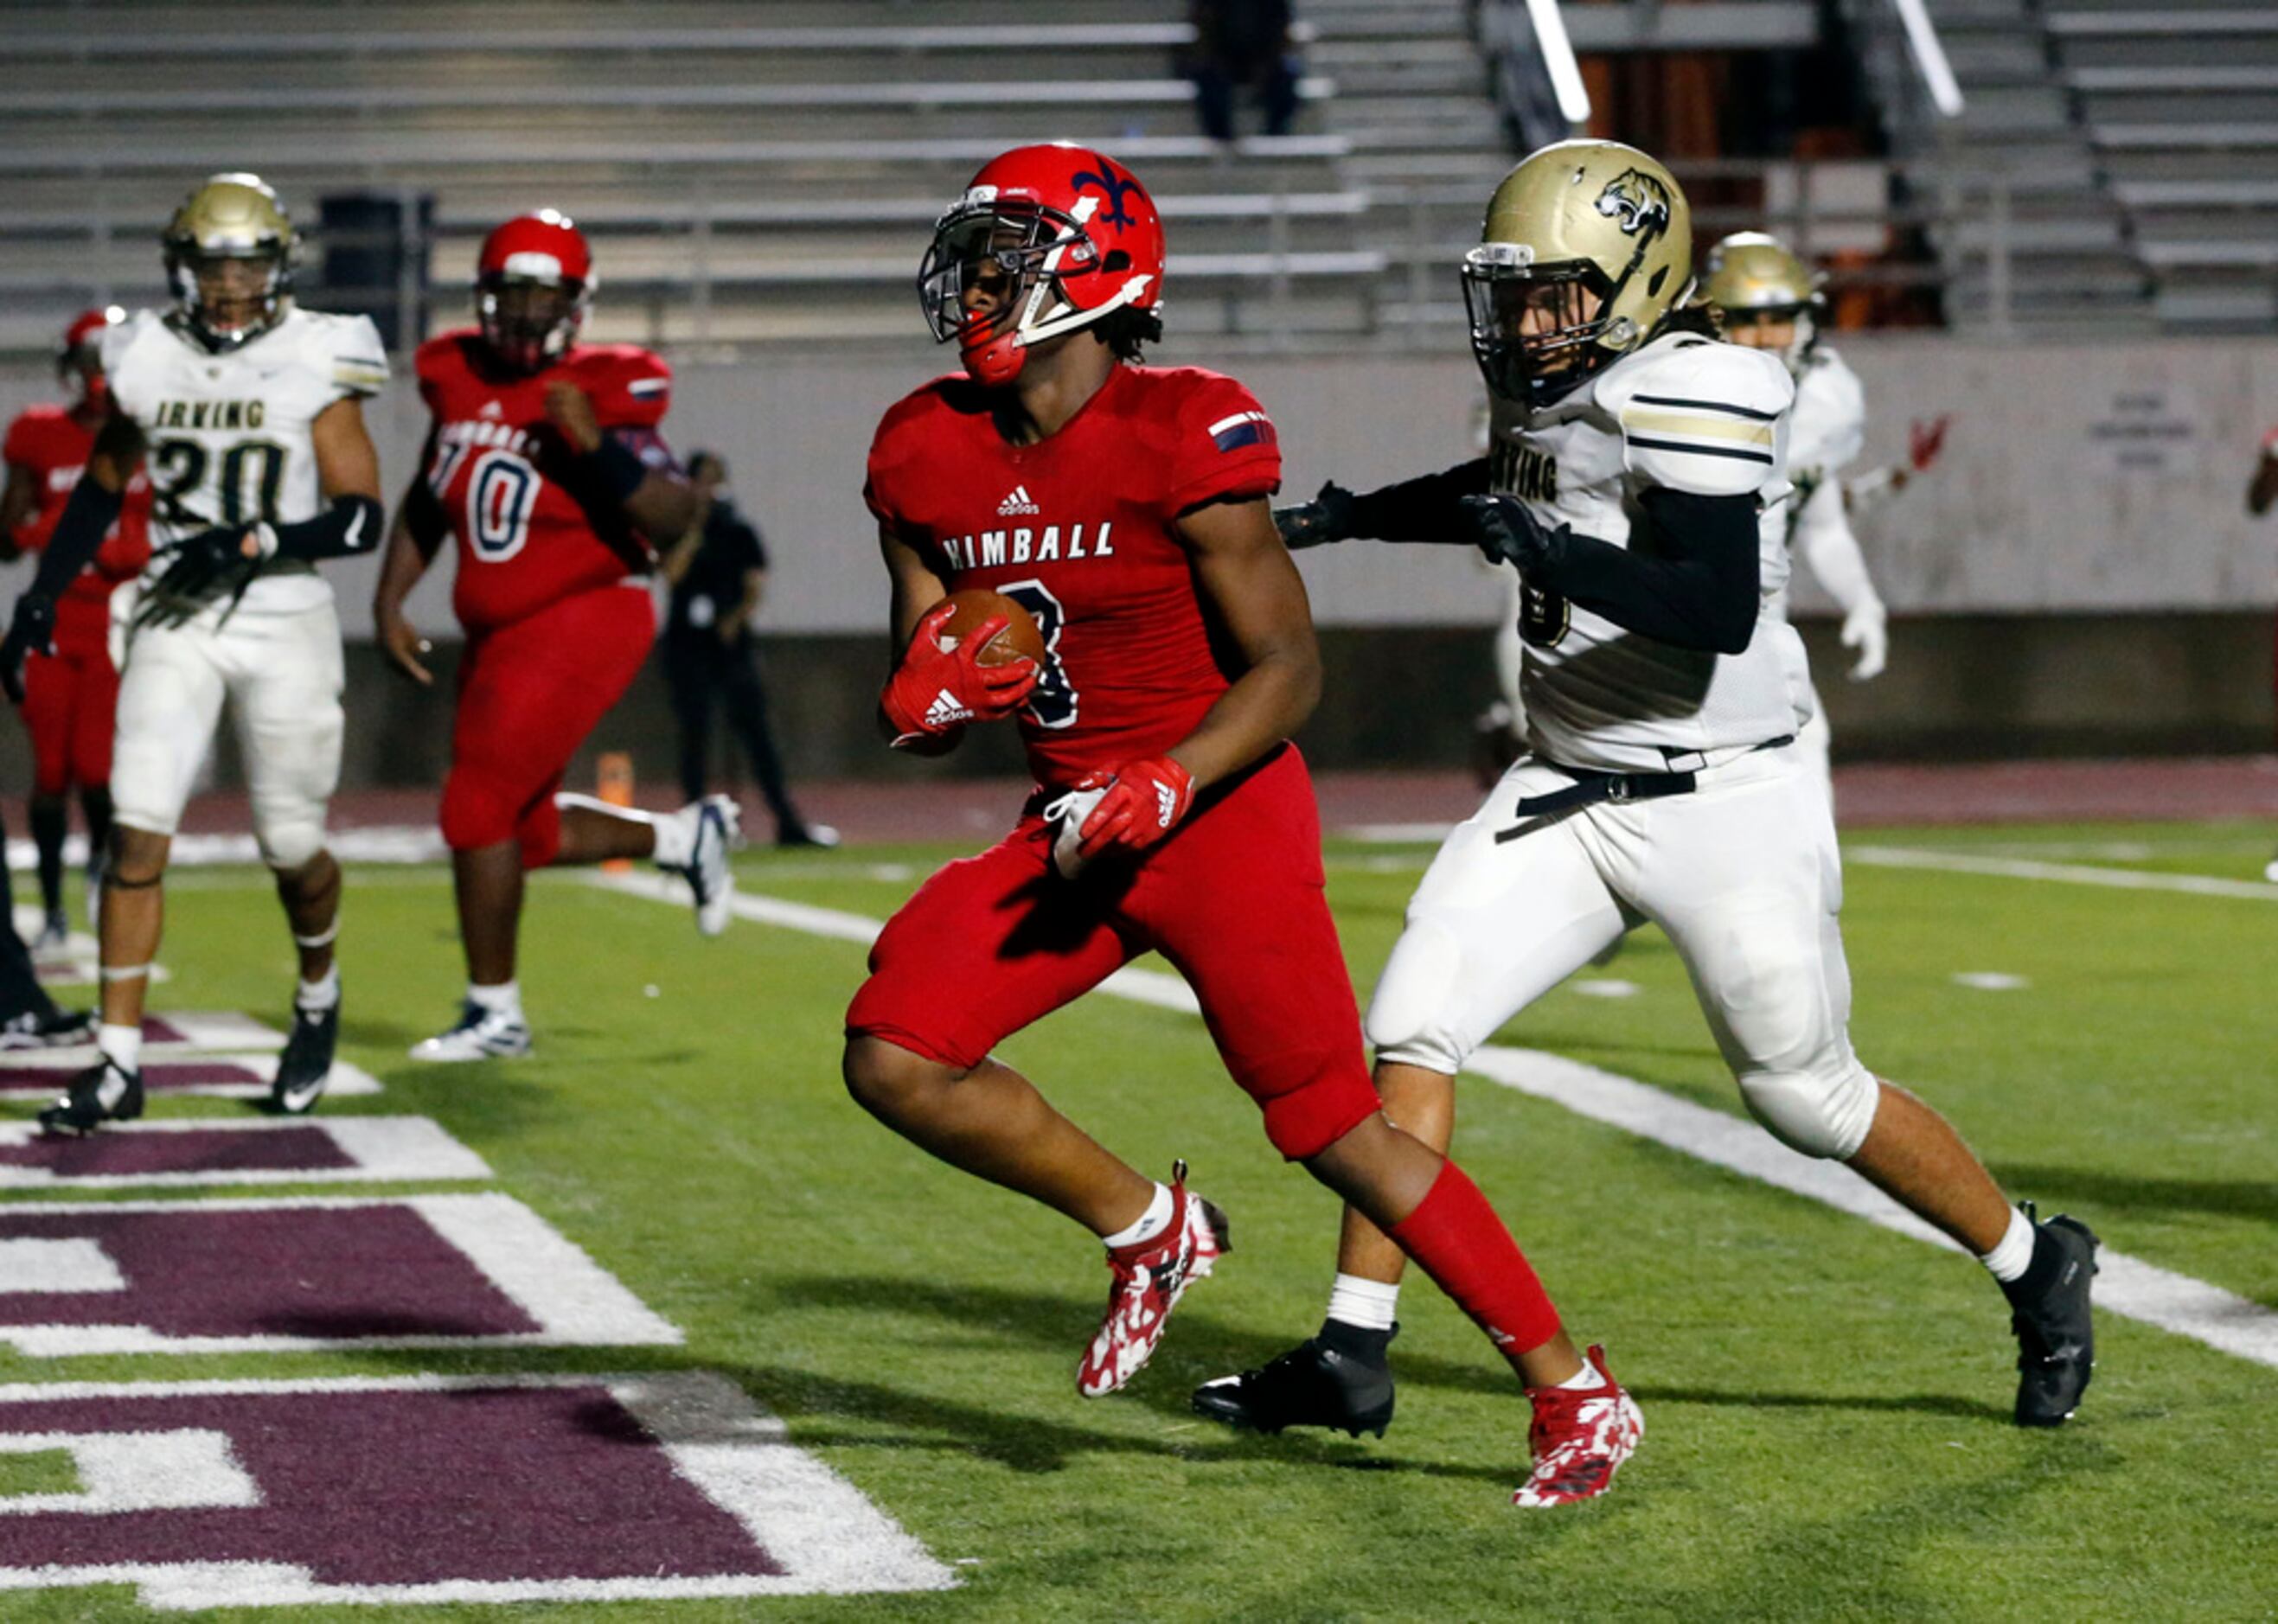 Kimball High RB Cortavious Smith (3) rushes into the end zone for another touchdown during...